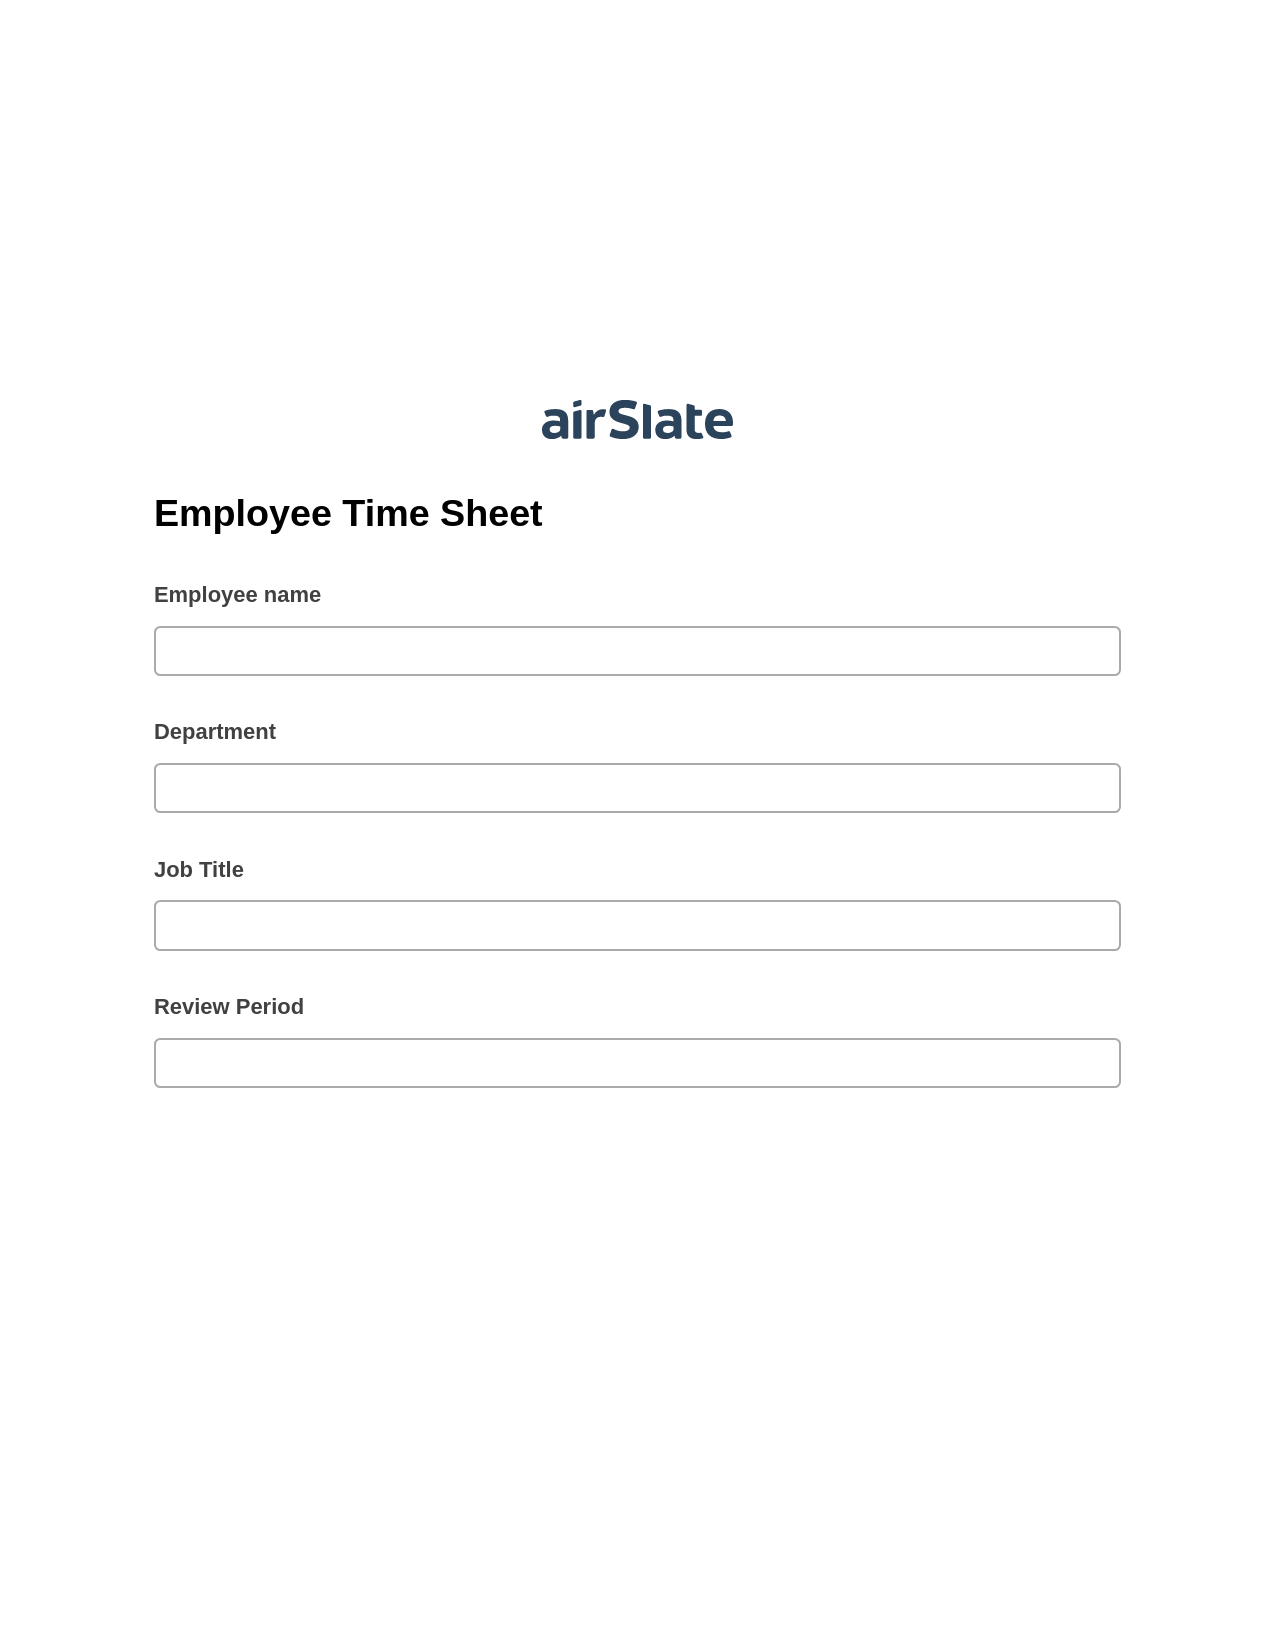 Employee Time Sheet Pre-fill Document Bot, Remove Tags From Slate Bot, Slack Two-Way Binding Bot